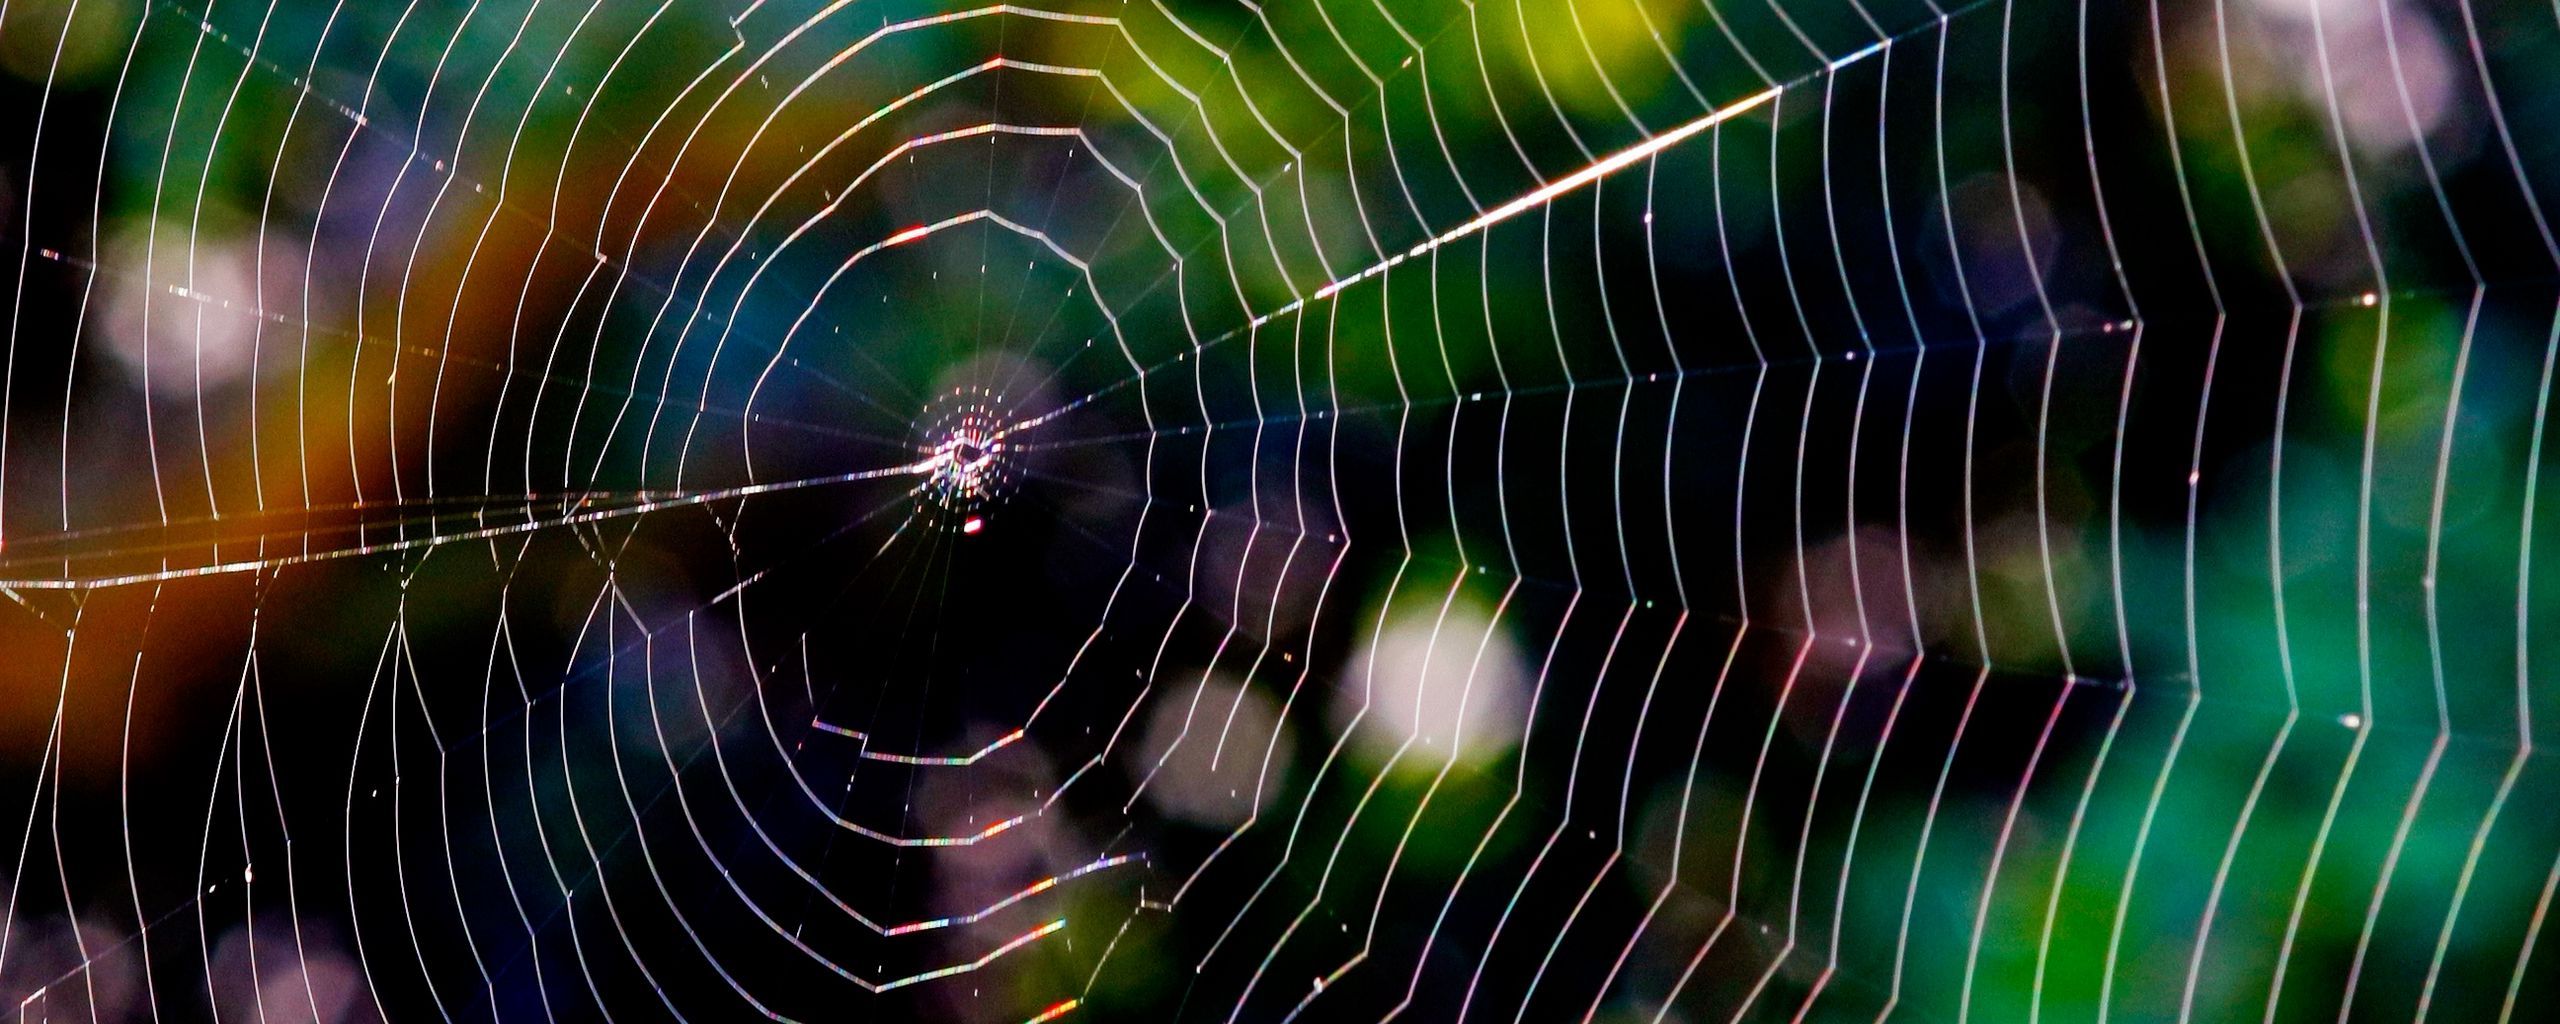 Download wallpaper 2560x1024 spider web, glare, network, braided ultrawide monitor HD background